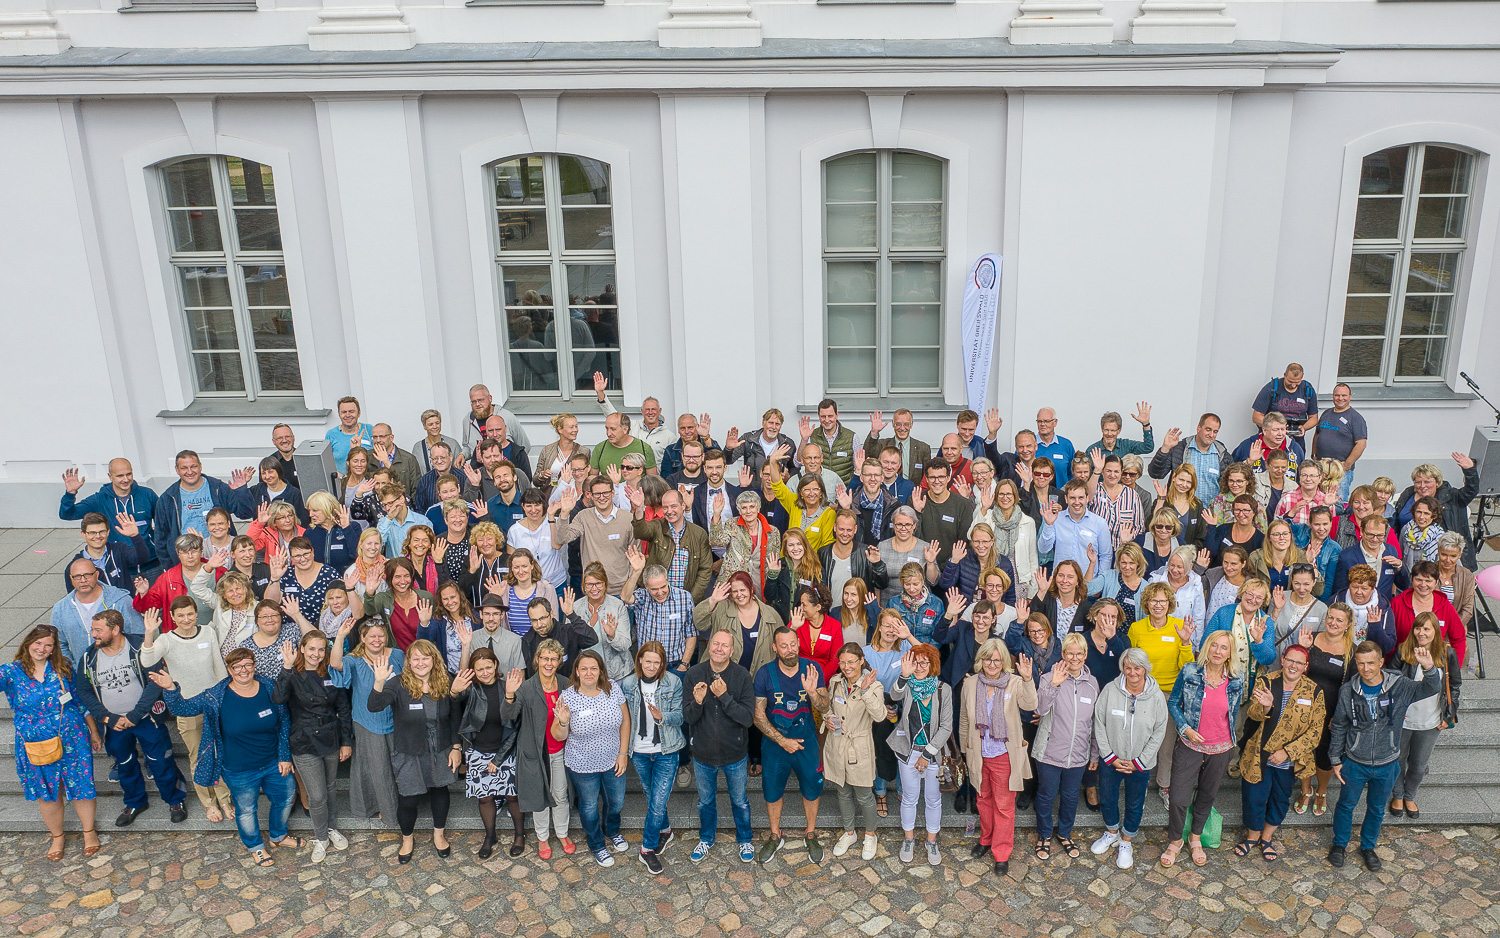 Members of staff in the courtyard of the Historical Campus in 2019 - Photo: Sebastian Parg